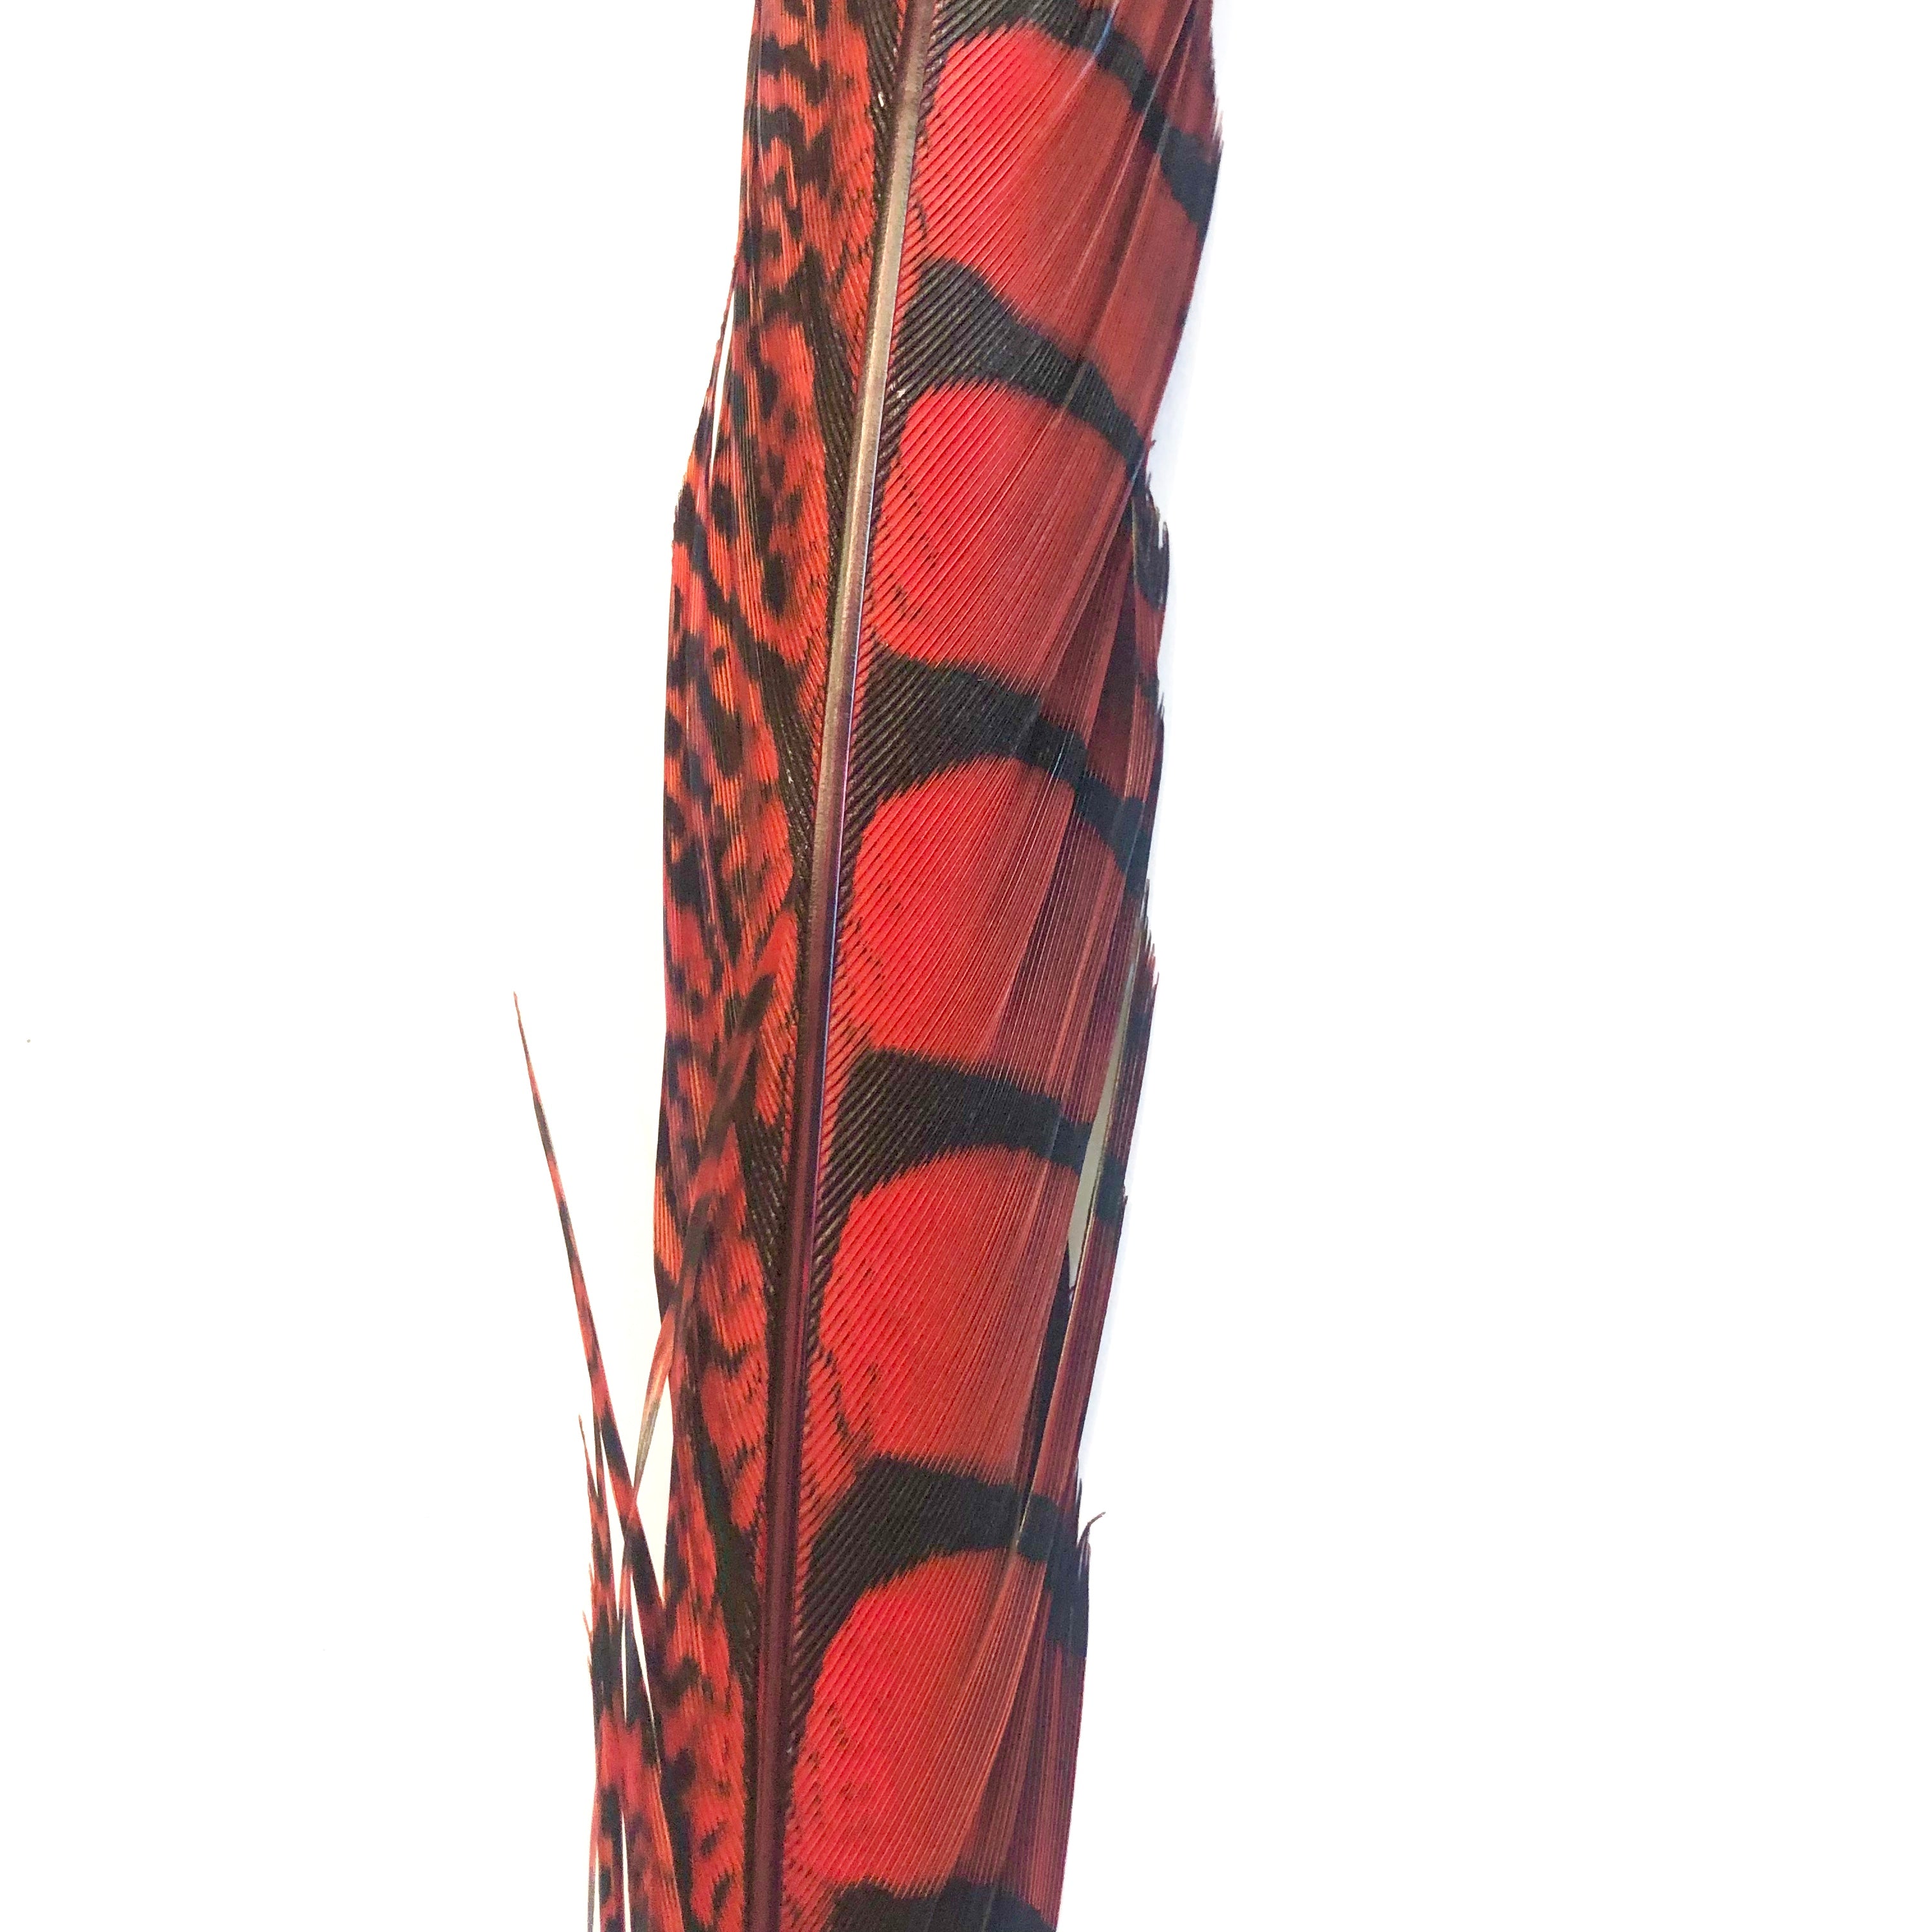 30" to 38" Lady Amherst Pheasant Side Tail Feather - Red ((SECONDS))